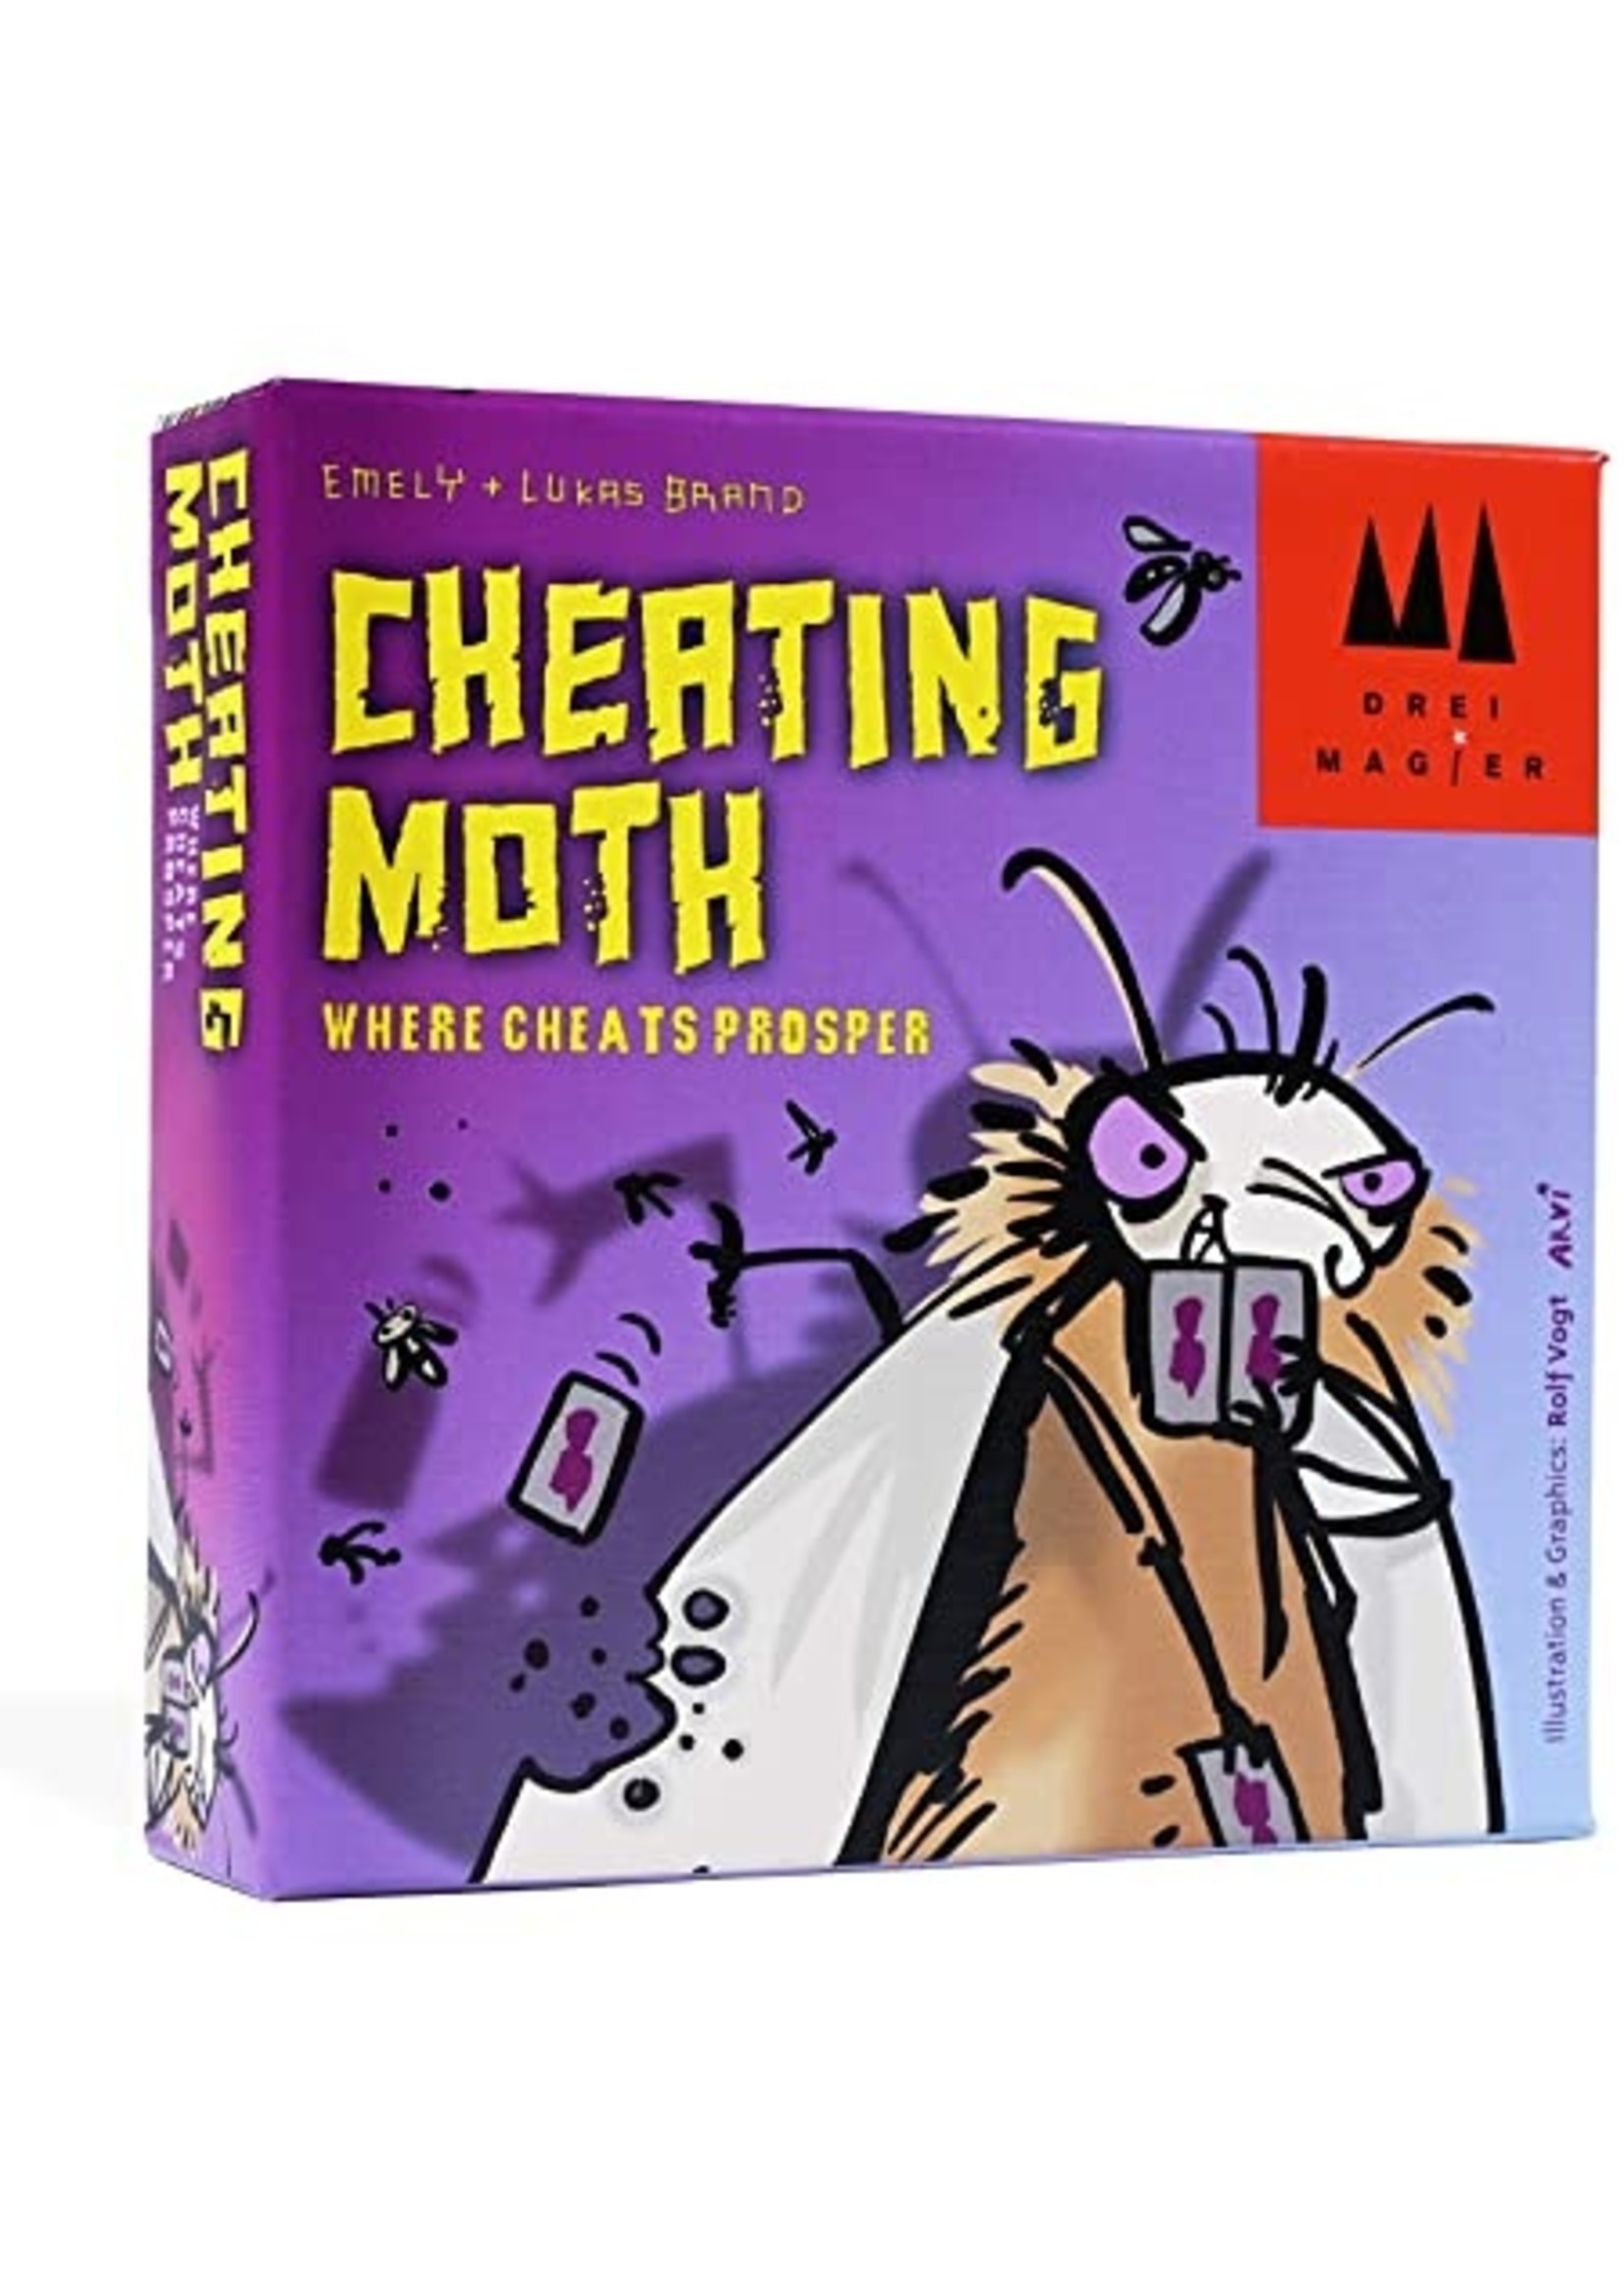 Cockroach Poker + Cheating Moth, Games That Let You Cheat